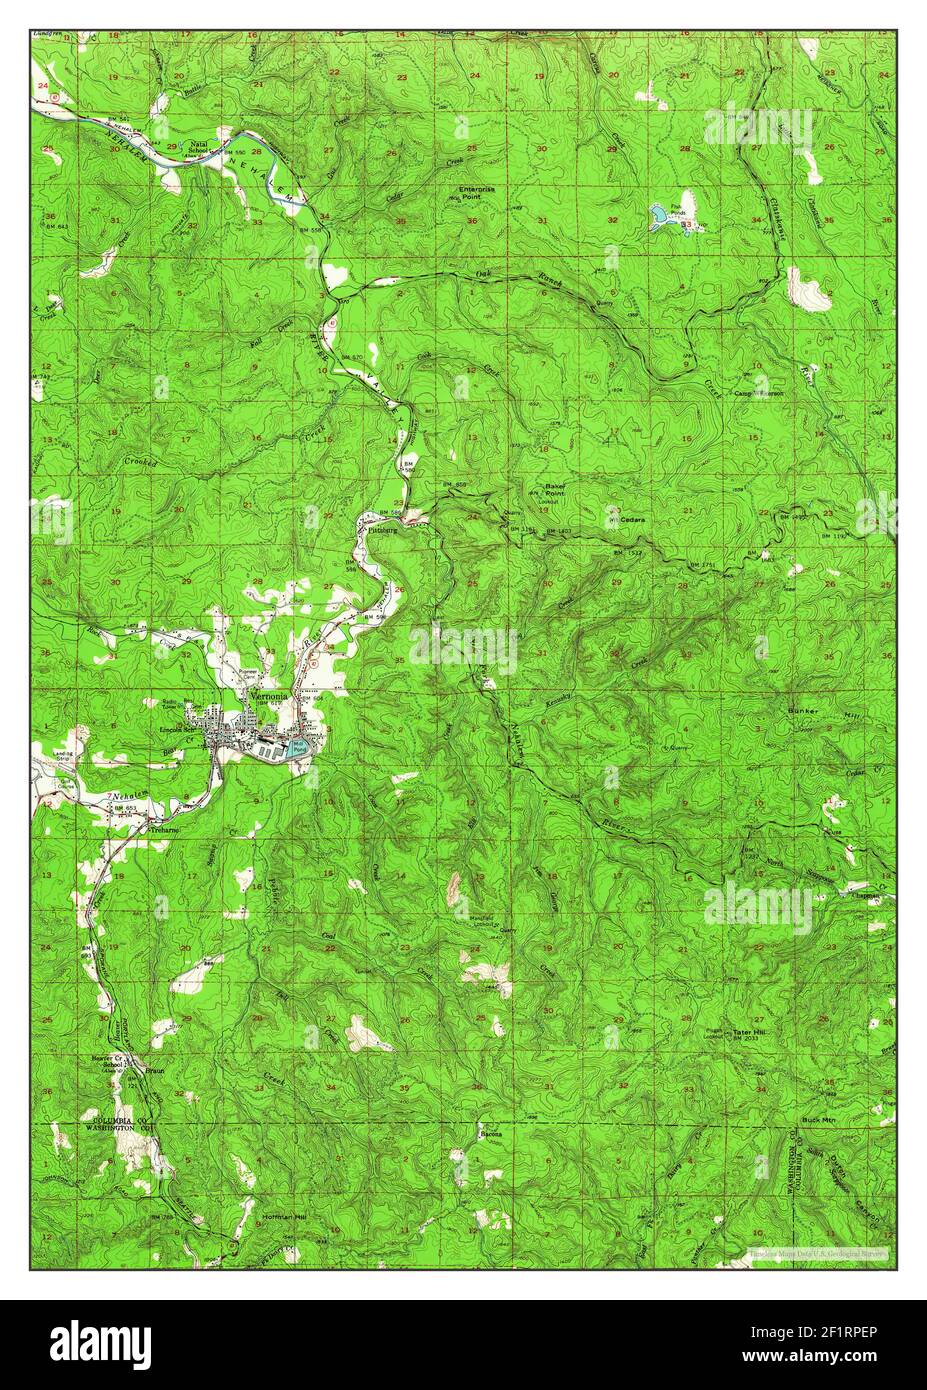 Vernonia, Oregon, map 1955, 1:62500, United States of America by Timeless Maps, data U.S. Geological Survey Stock Photo